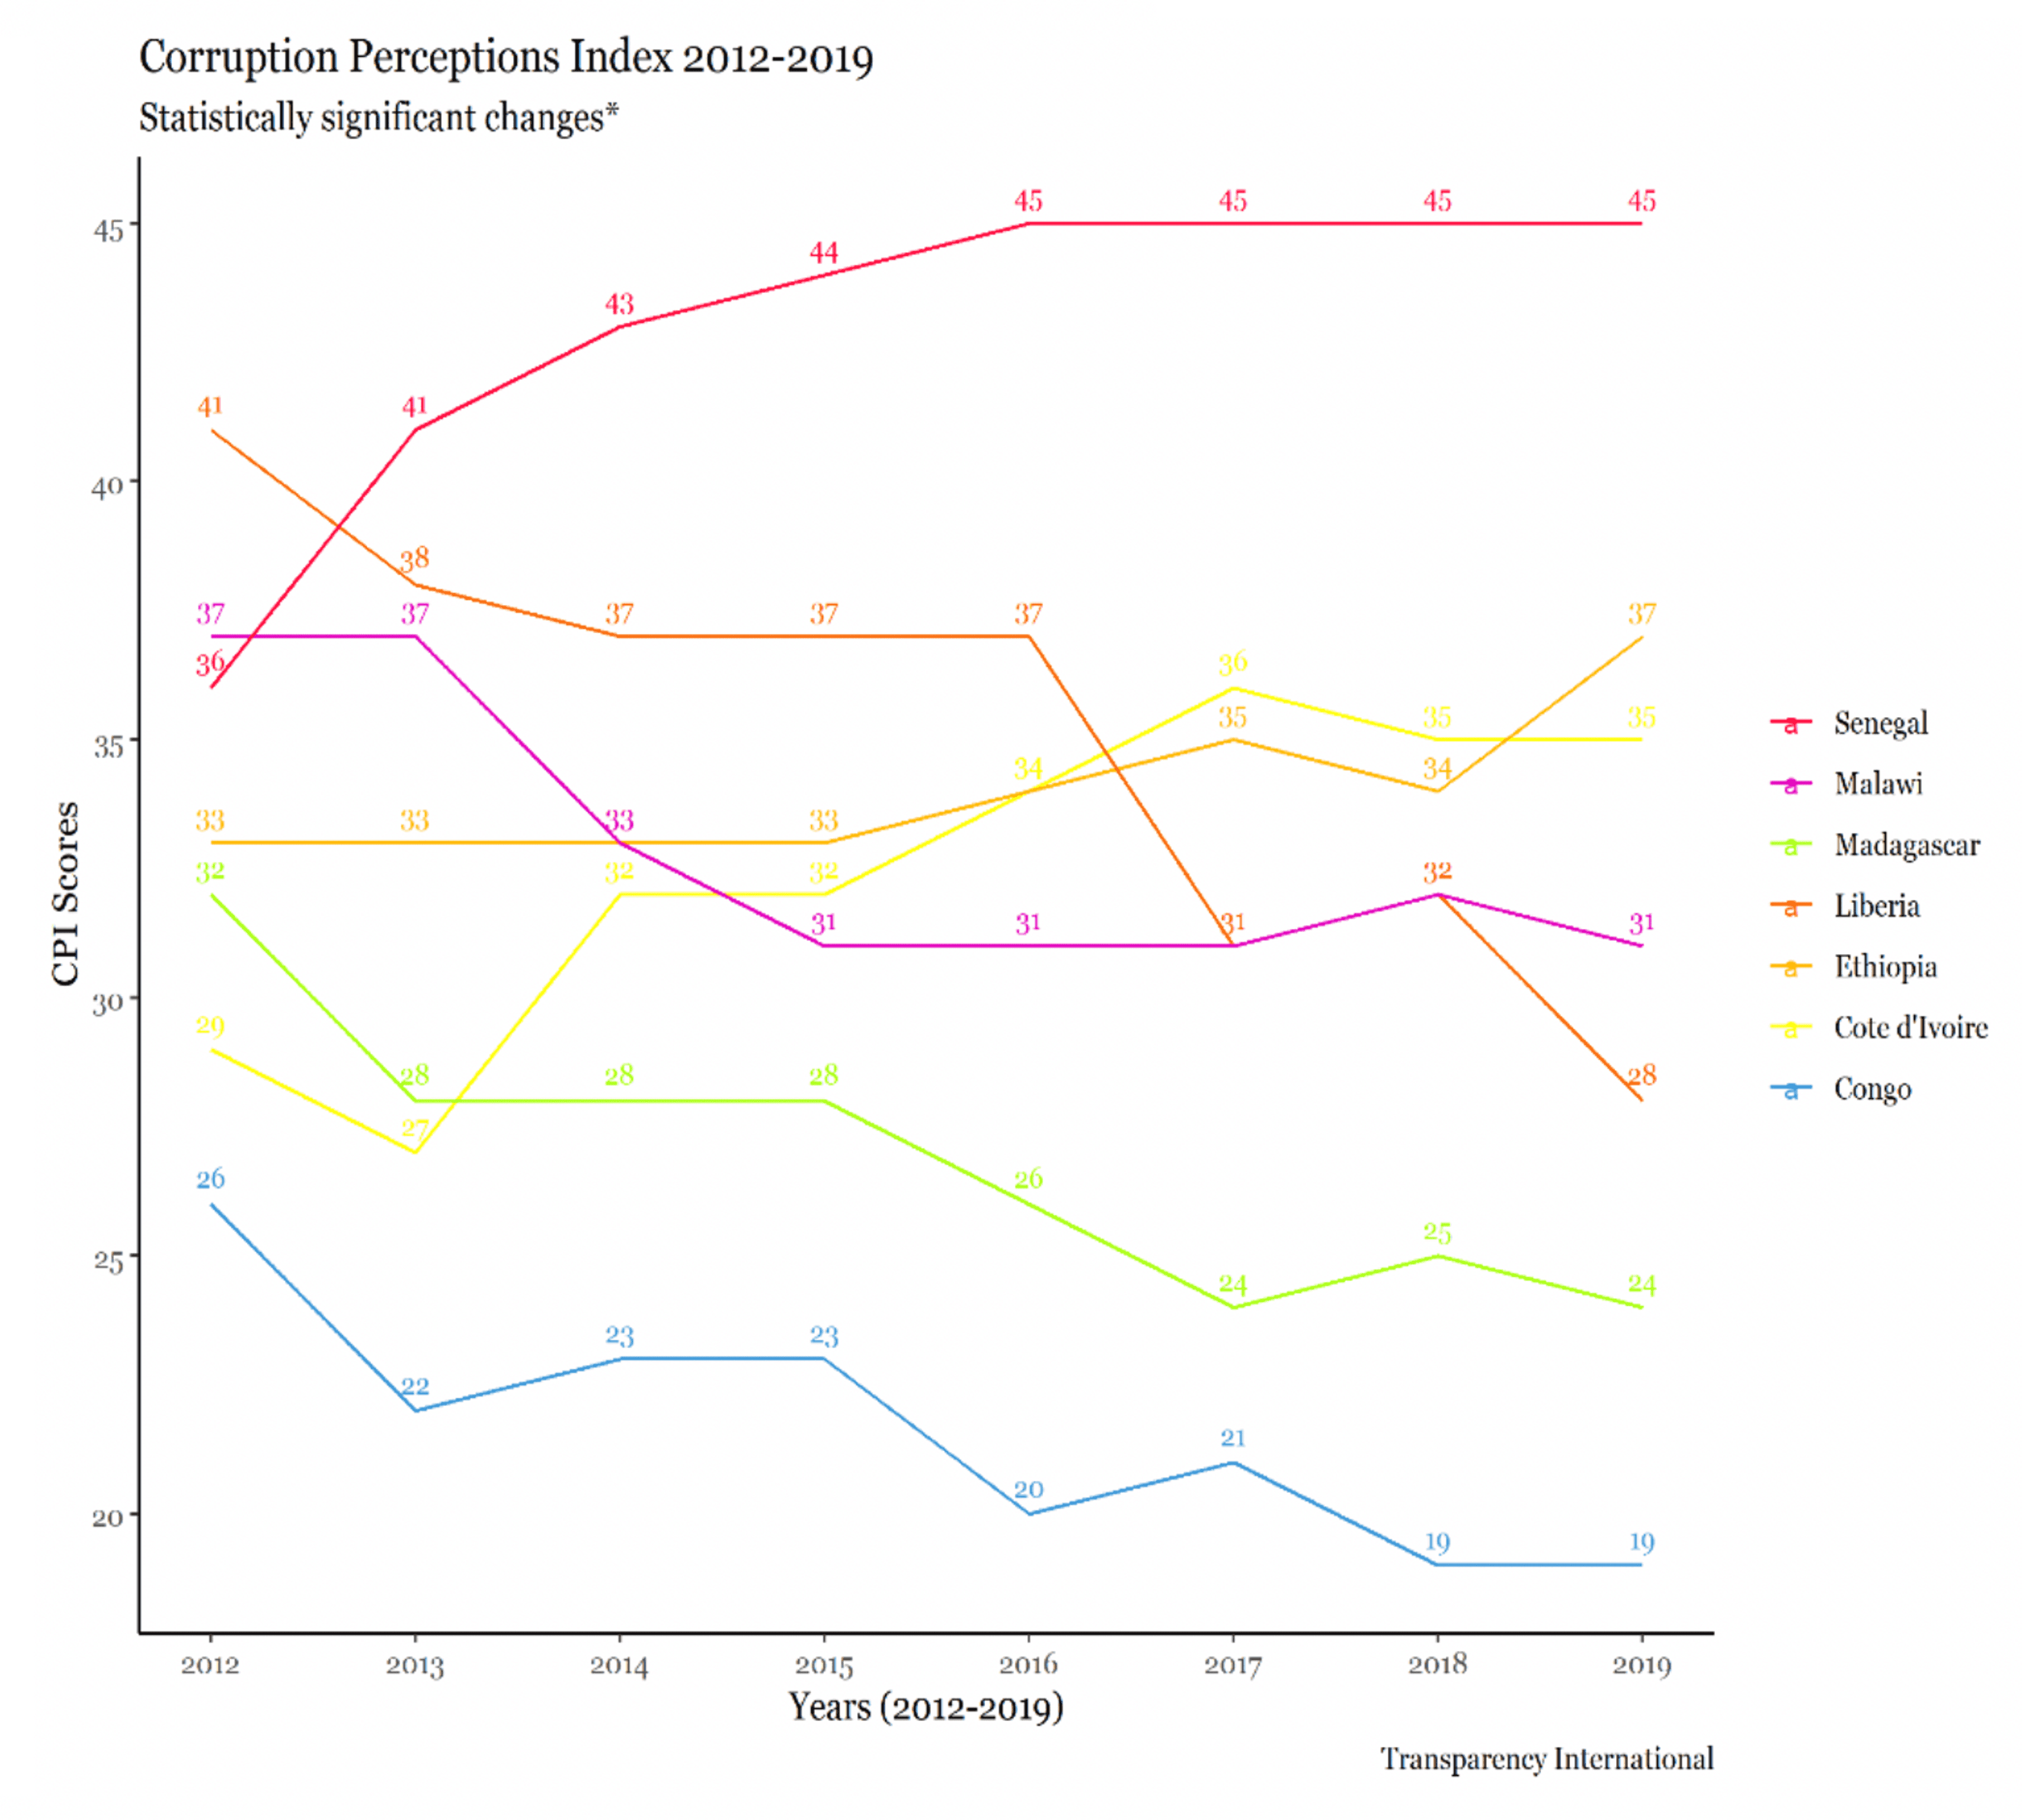 Graph of seven countries and their CPI score over time